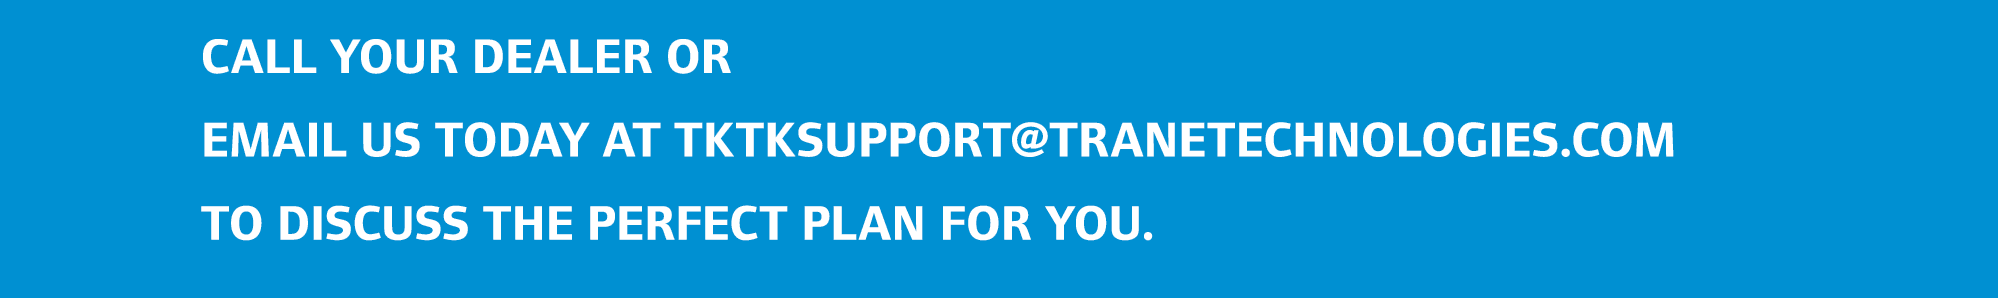 Call your dealer or email us today at TKTKsupport@tranetechnologies.com to discuss the perfect plan for you.